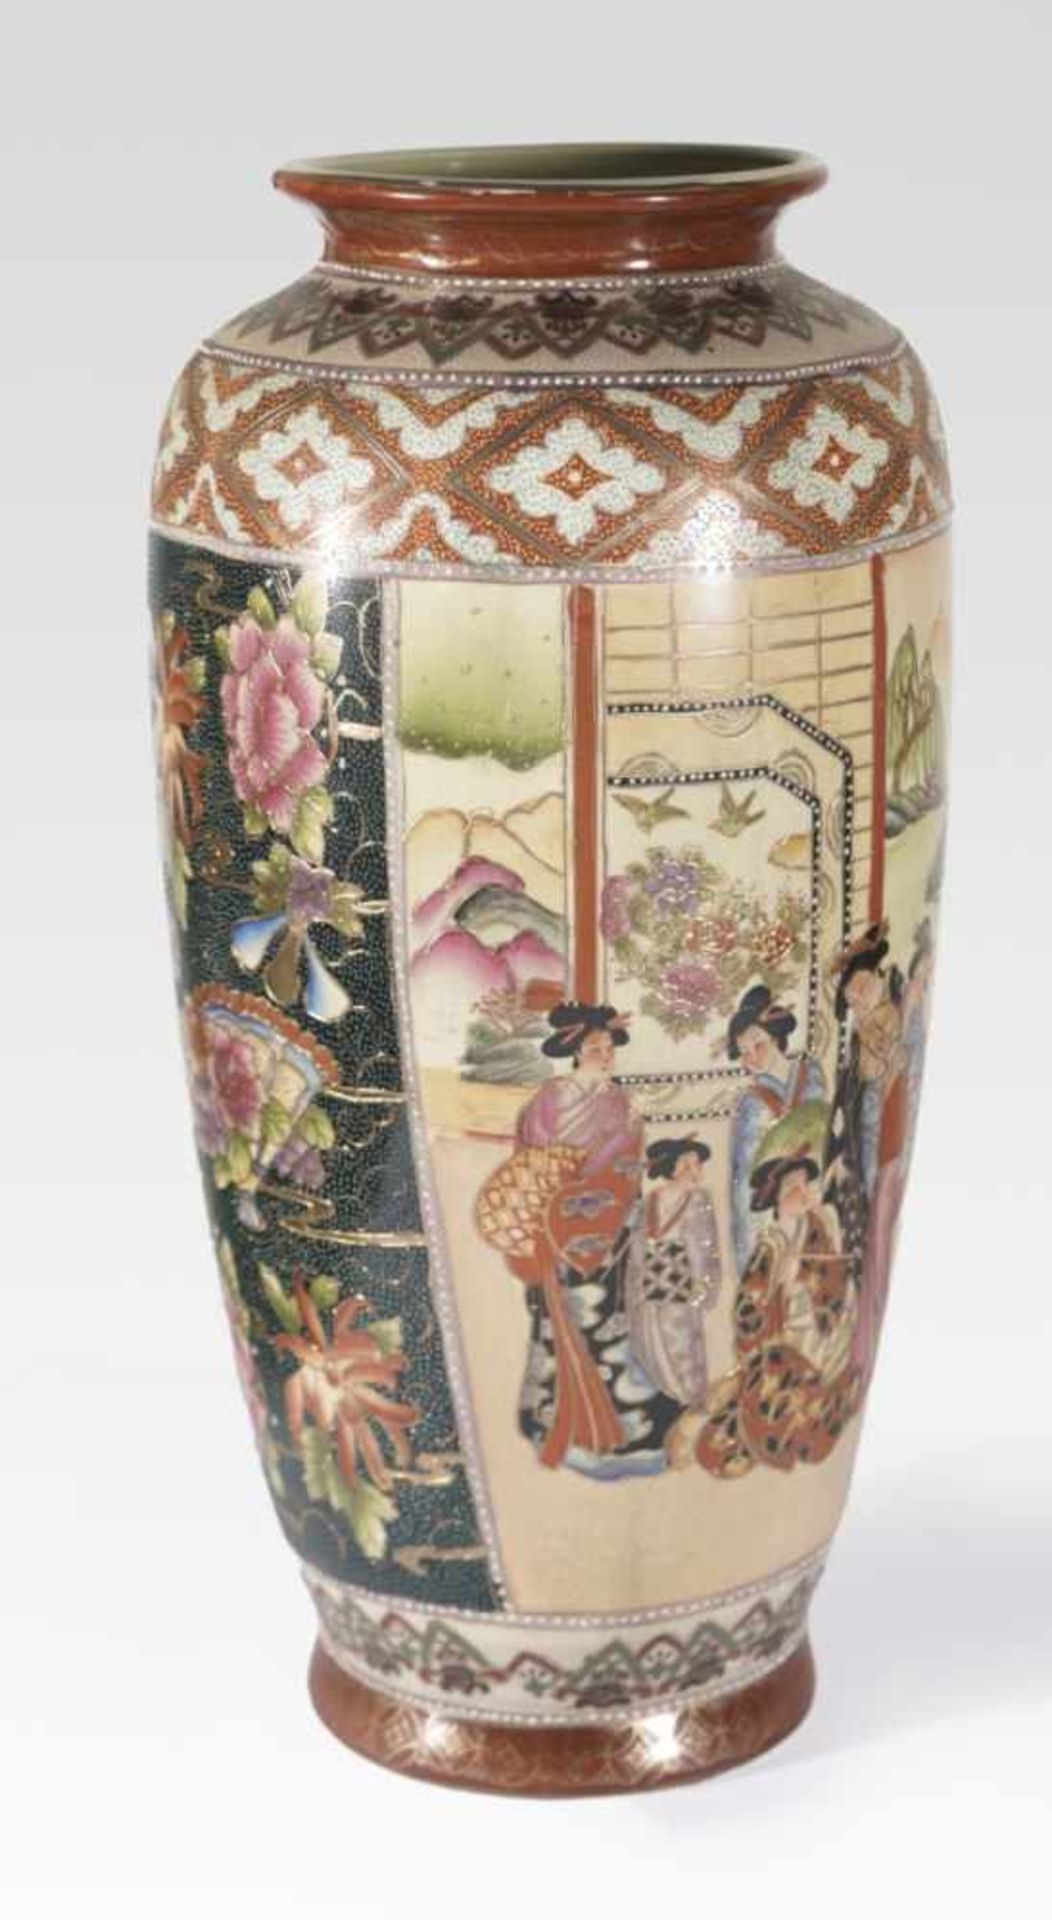 An Amazing Japanese Vase, 20th c., ca. 52 cm high, Provenance: Private property